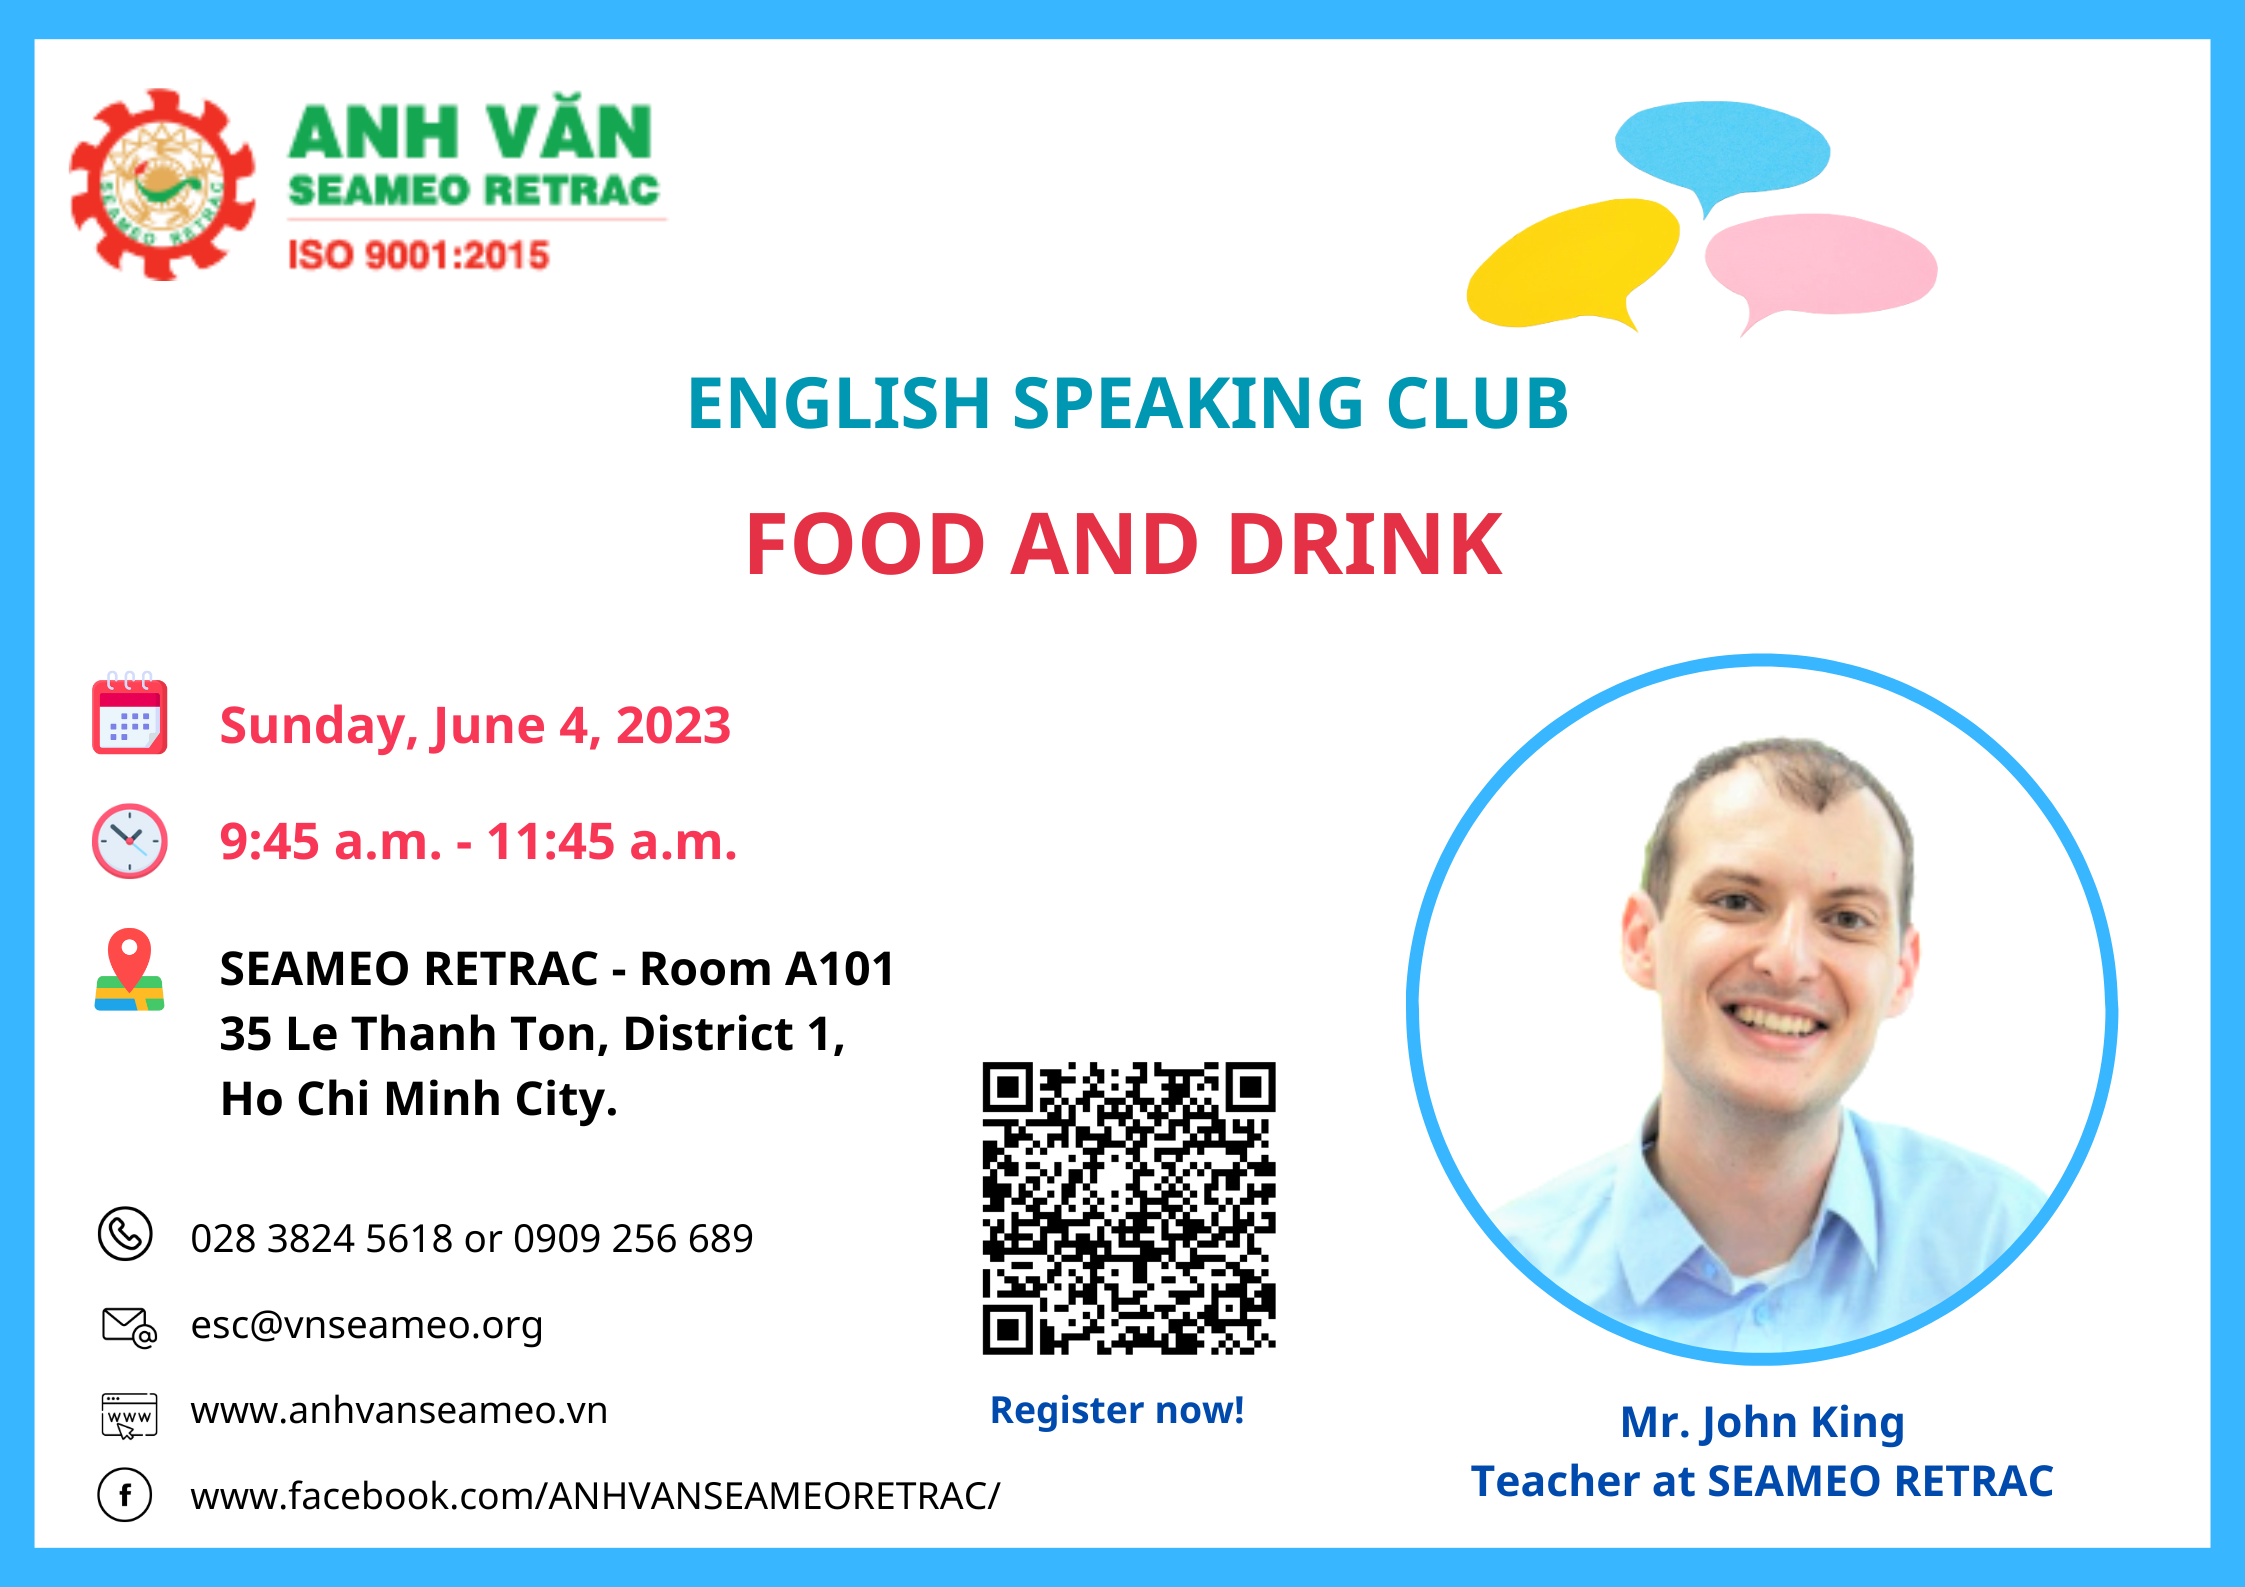 English Speaking Club titled “Food and Drink”